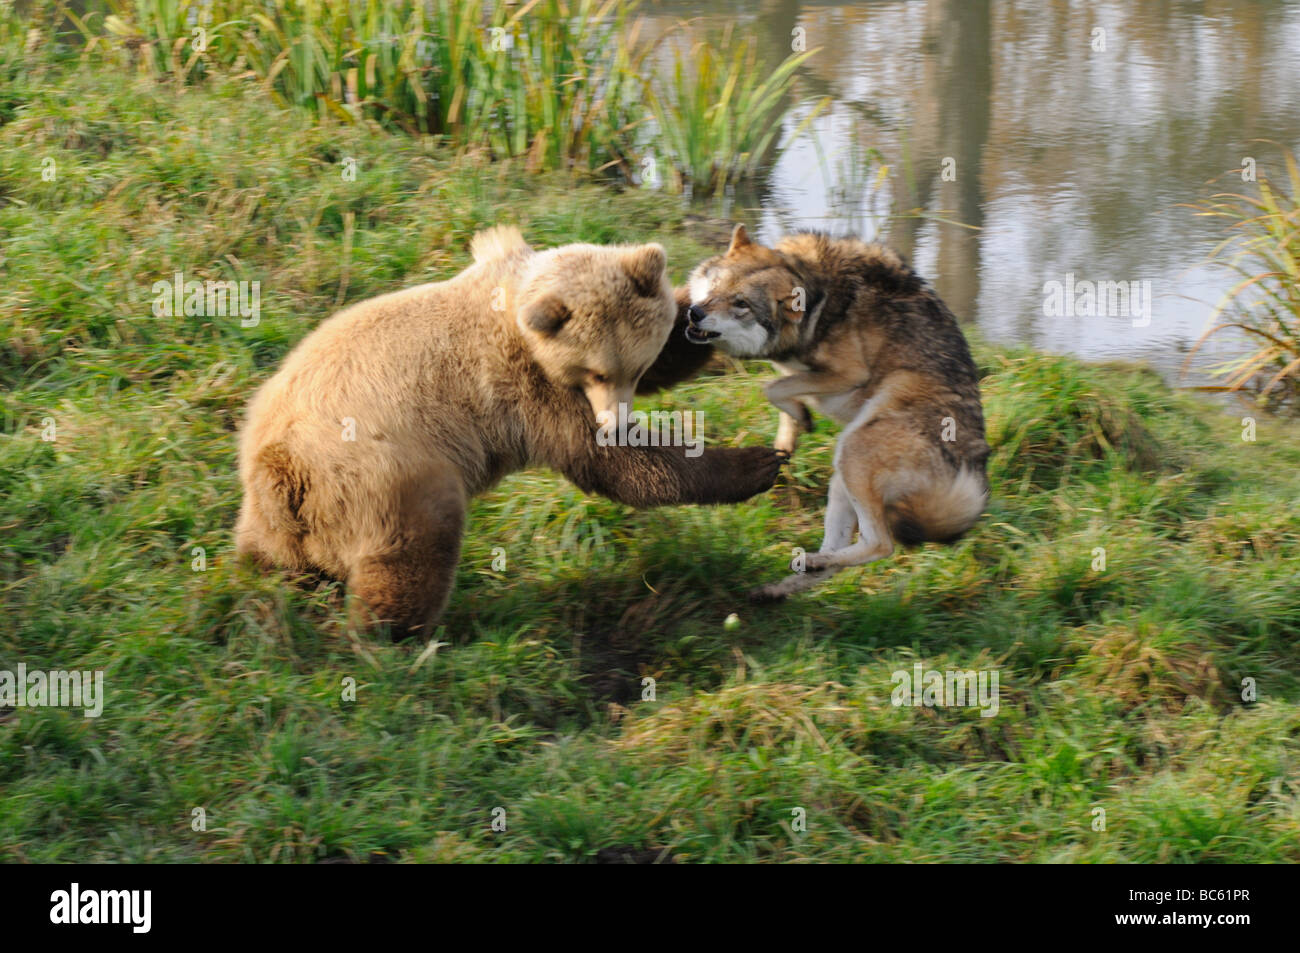 Grey wolf (Canis lupus) and Brown bear (Ursus arctos) fighting in forest, Bavaria, Germany Stock Photo